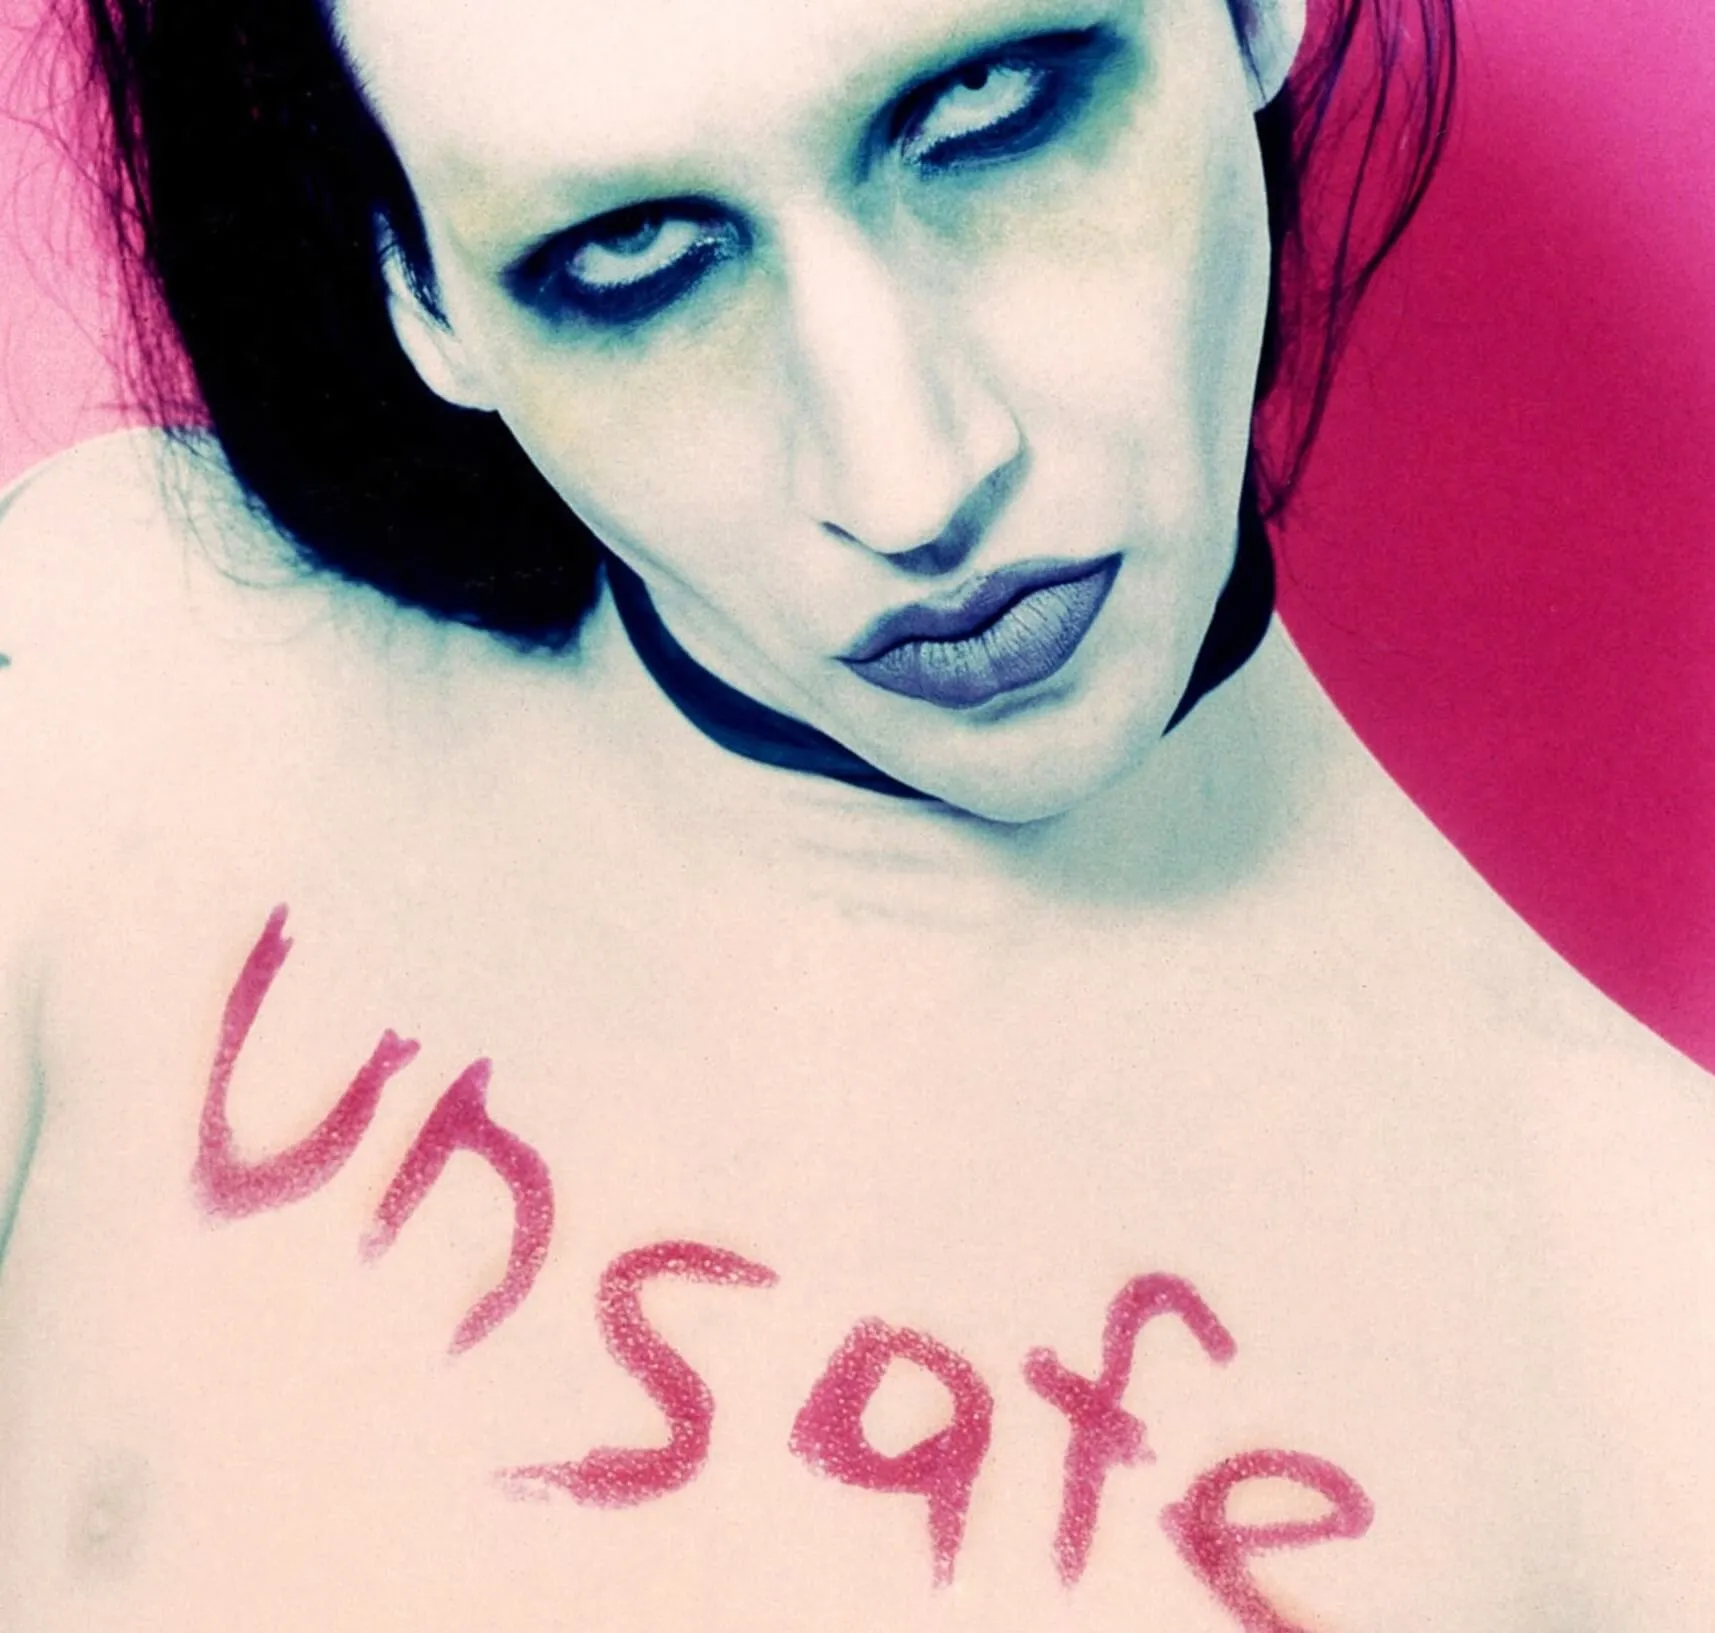 Marilyn Manson with the word "unsafe" on his chest